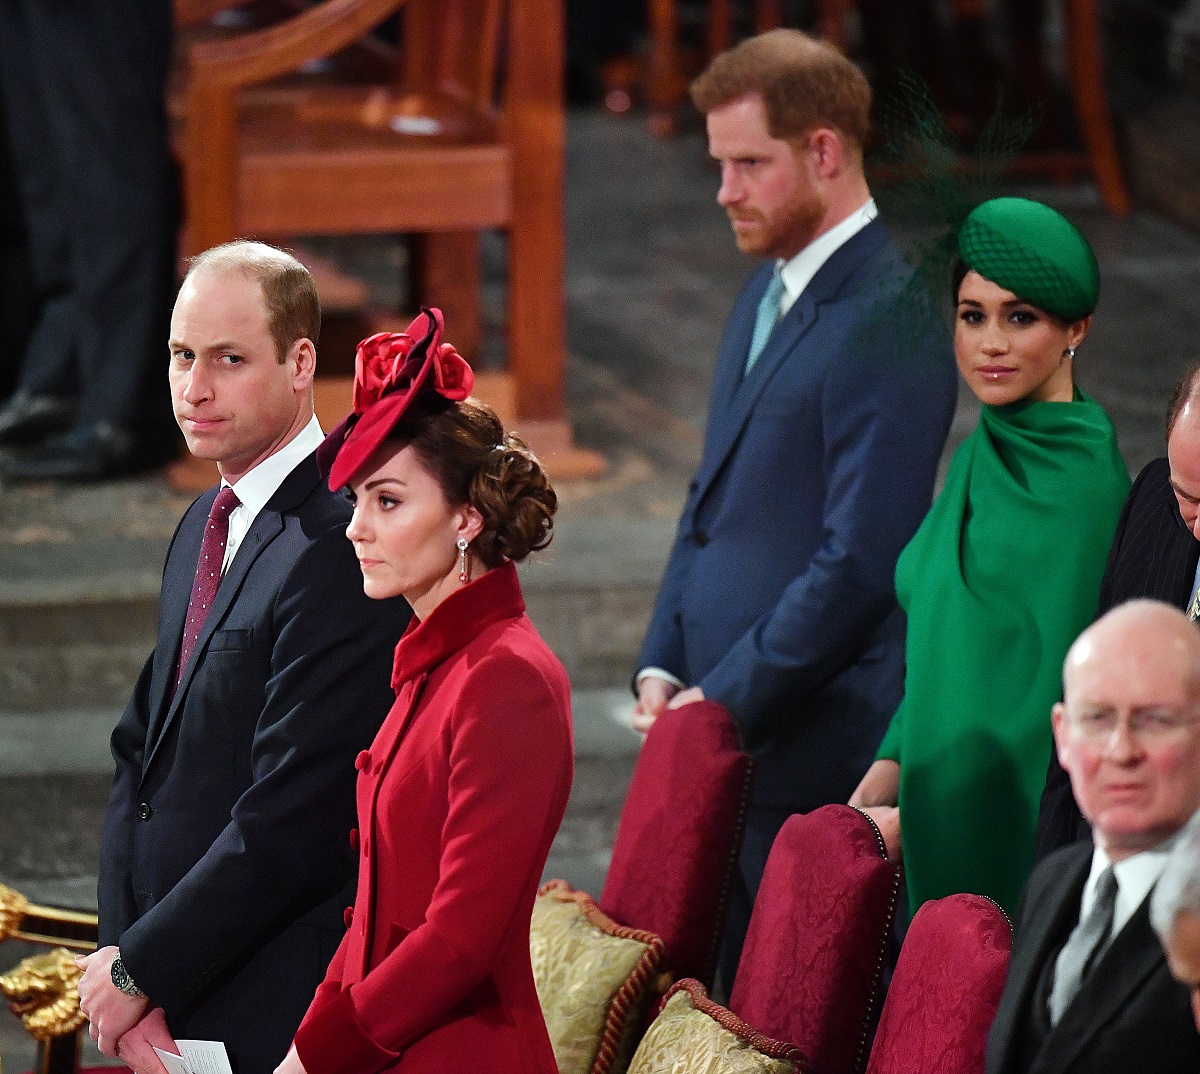 Prince William, Kate Middleton, Prince Harry, and Meghan Markle at Commonwealth Day Service in 2020